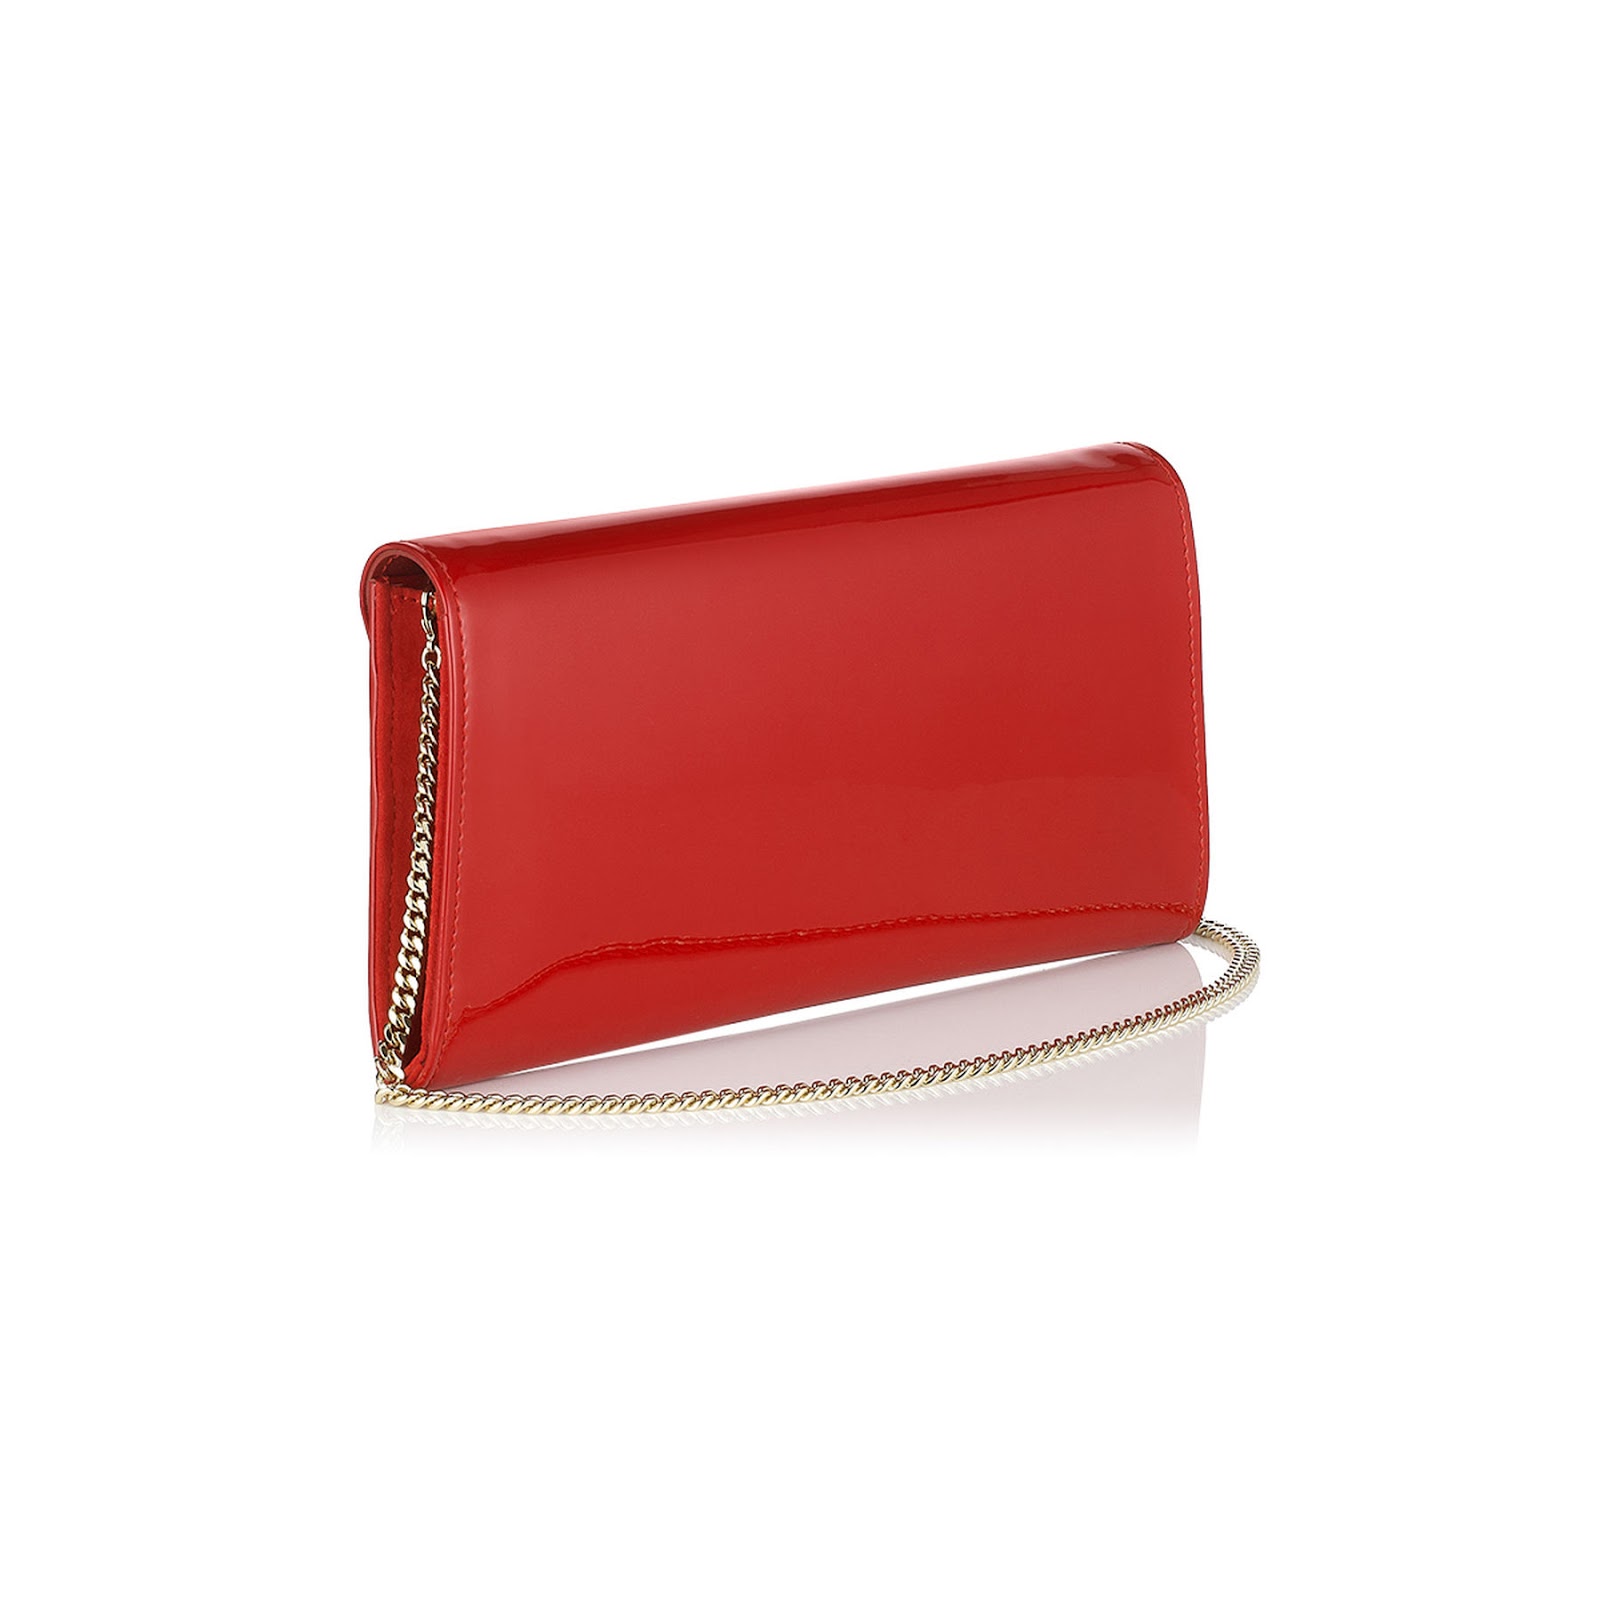 Reed Fashion Blog: JIMMY CHOO MARGOT RED PATENT & SUEDE CLUTCH BAG